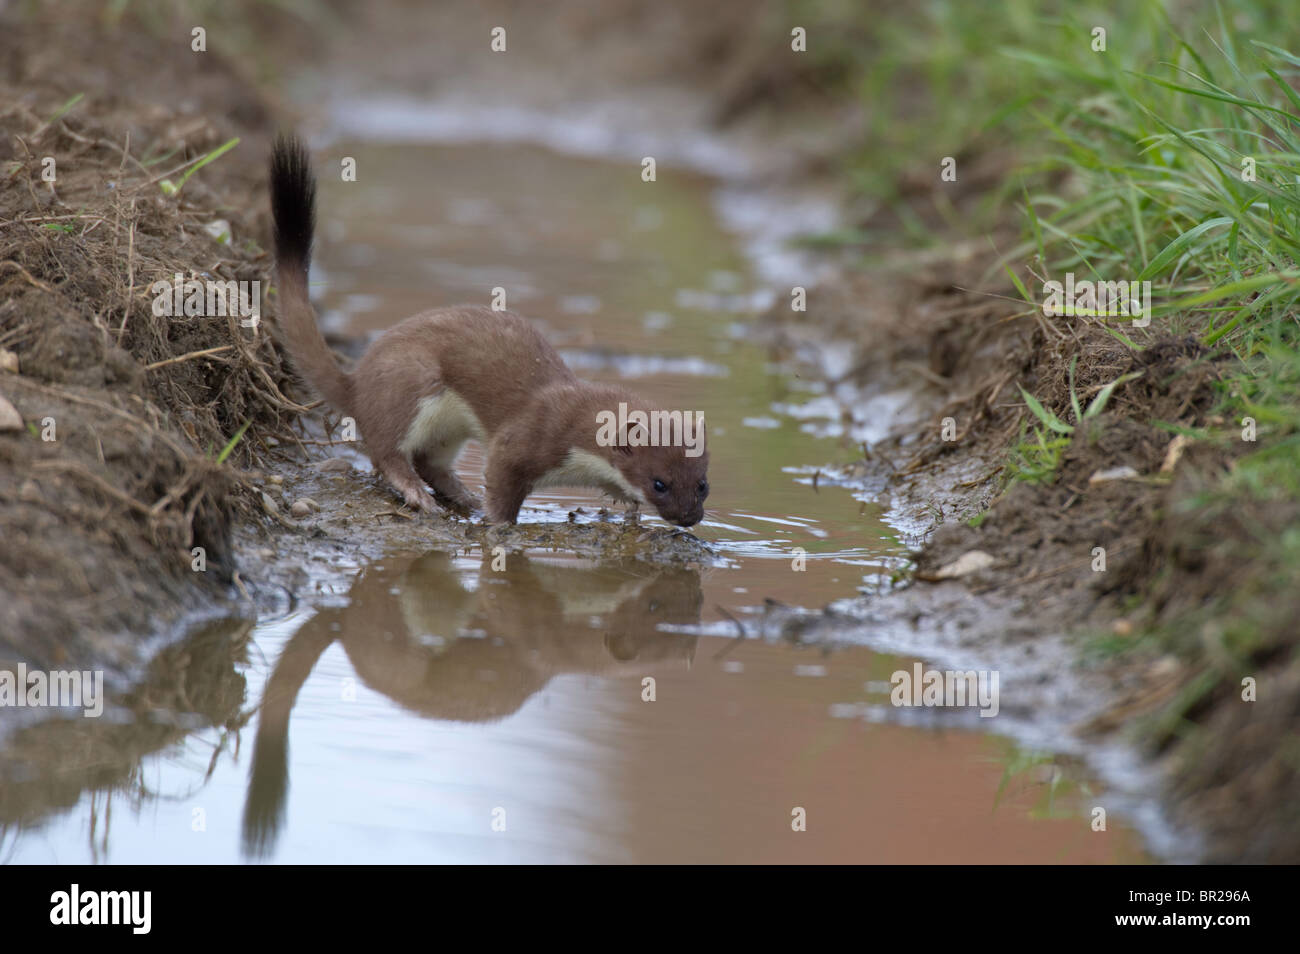 Stoat (Mustela erminea) drinking from a pool formed in a tractor wheeling. Stock Photo